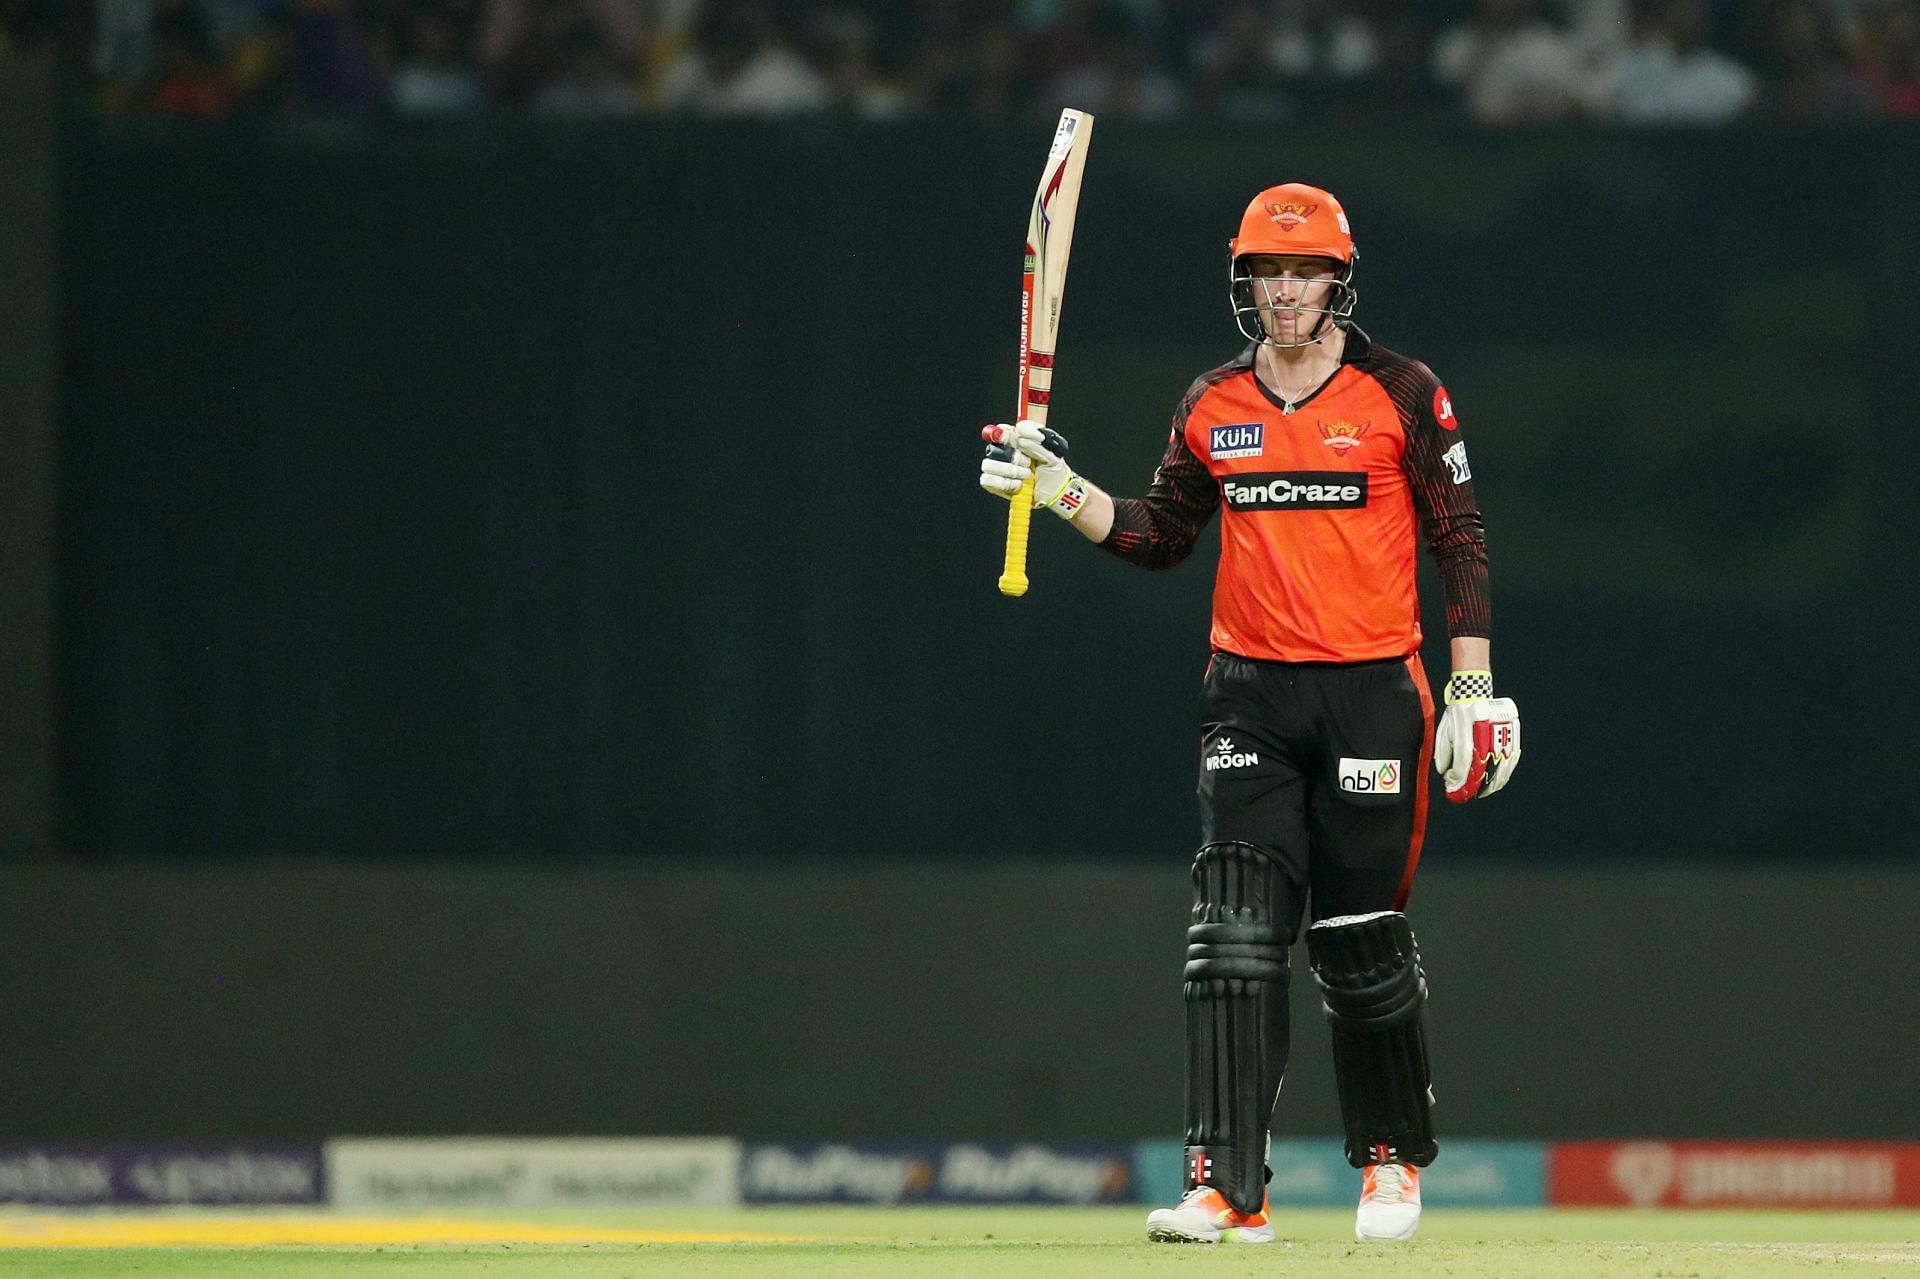 Harry Brook raises his bat after completing a half-century for SRH (PC: Twitter/IPL)